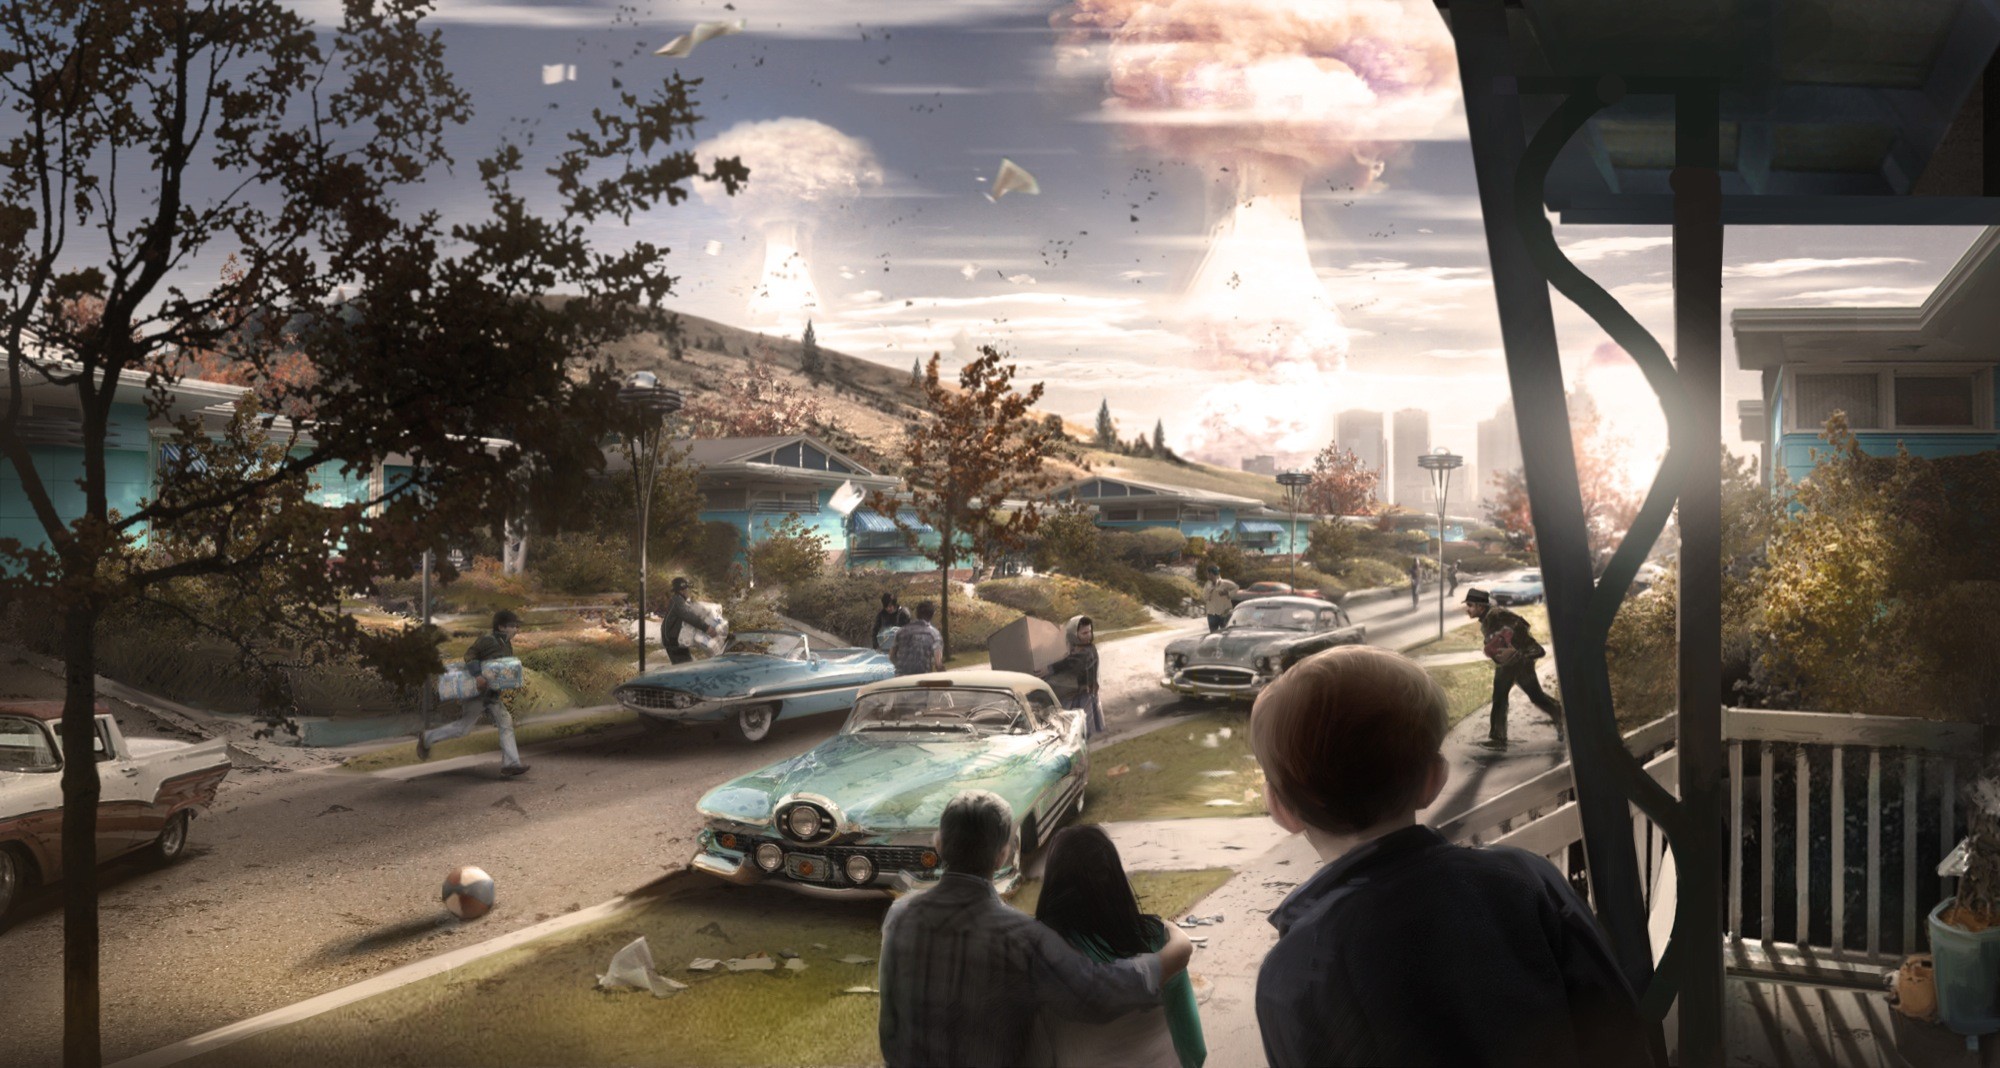 General 2000x1068 video games Fallout 4 Fallout PC gaming apocalyptic video game art mushroom clouds atomic bomb